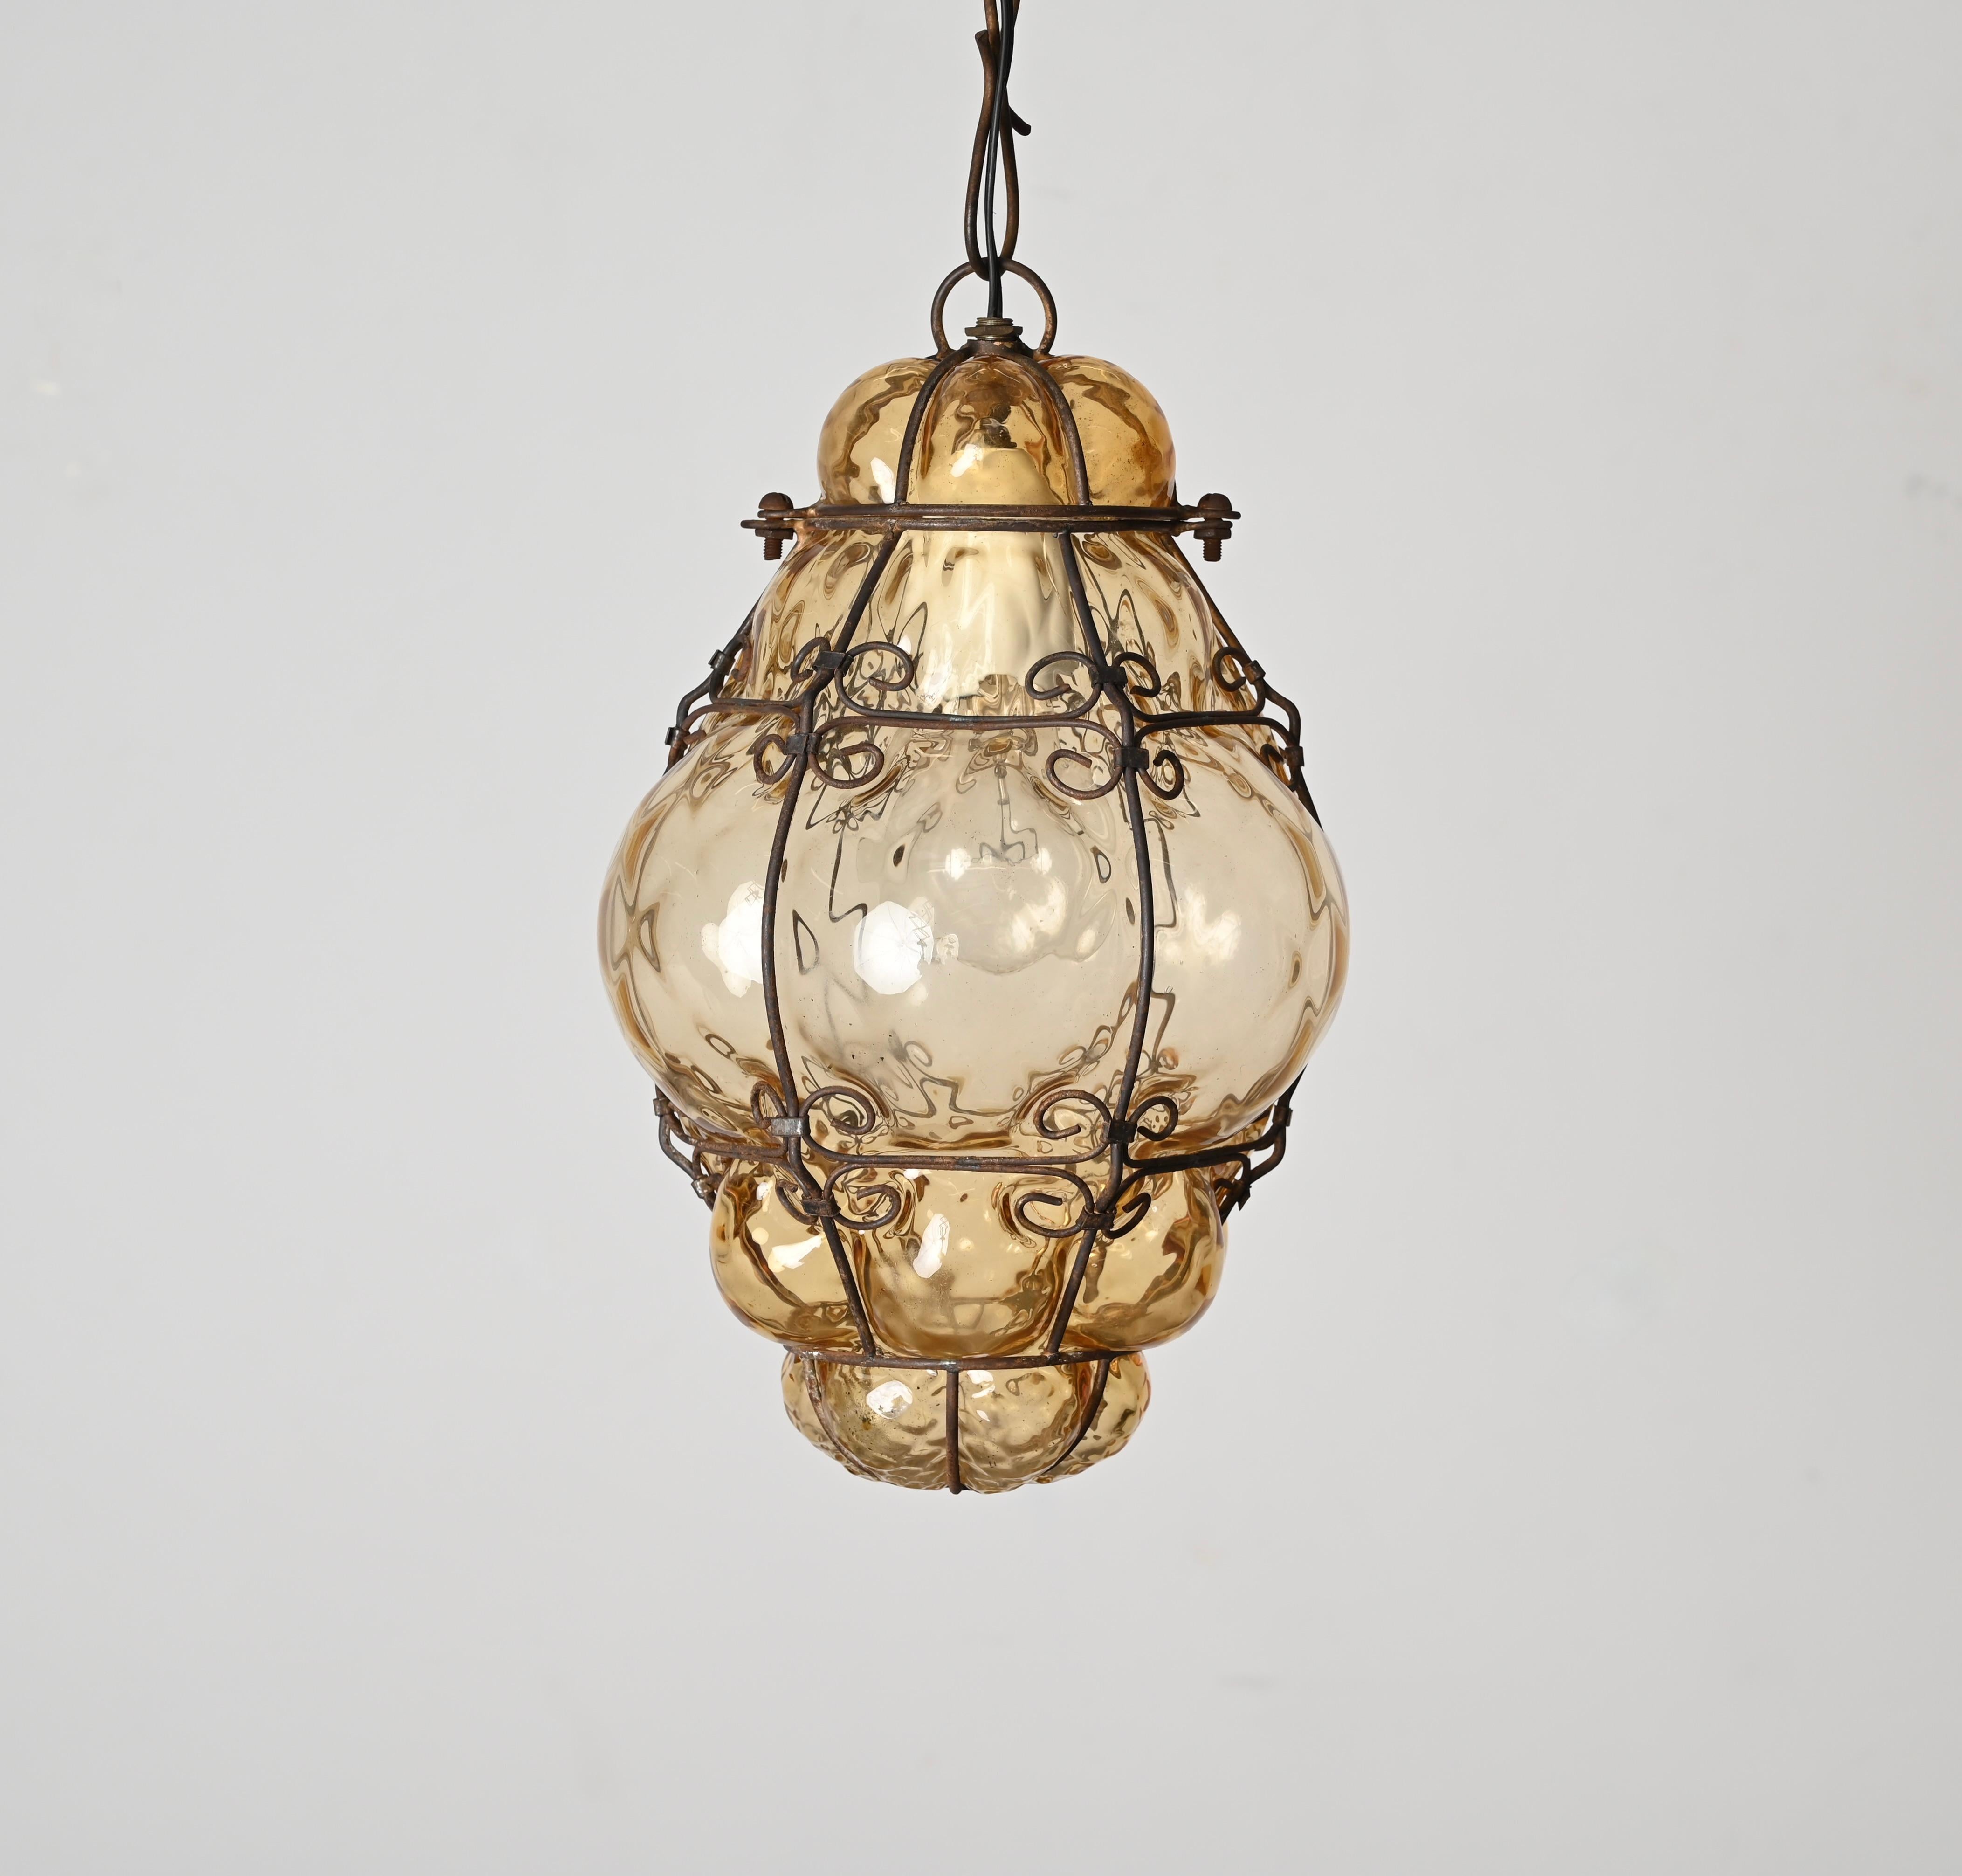 Fantastic Murano mouthblown amber glass lantern chandelier with iron frame. Giorgio Seguso probably designed this wonderful piece in Venice,Italy during the 1940s.

This unique Venetian Murano glass bubble cage pendant has an oriental style and a